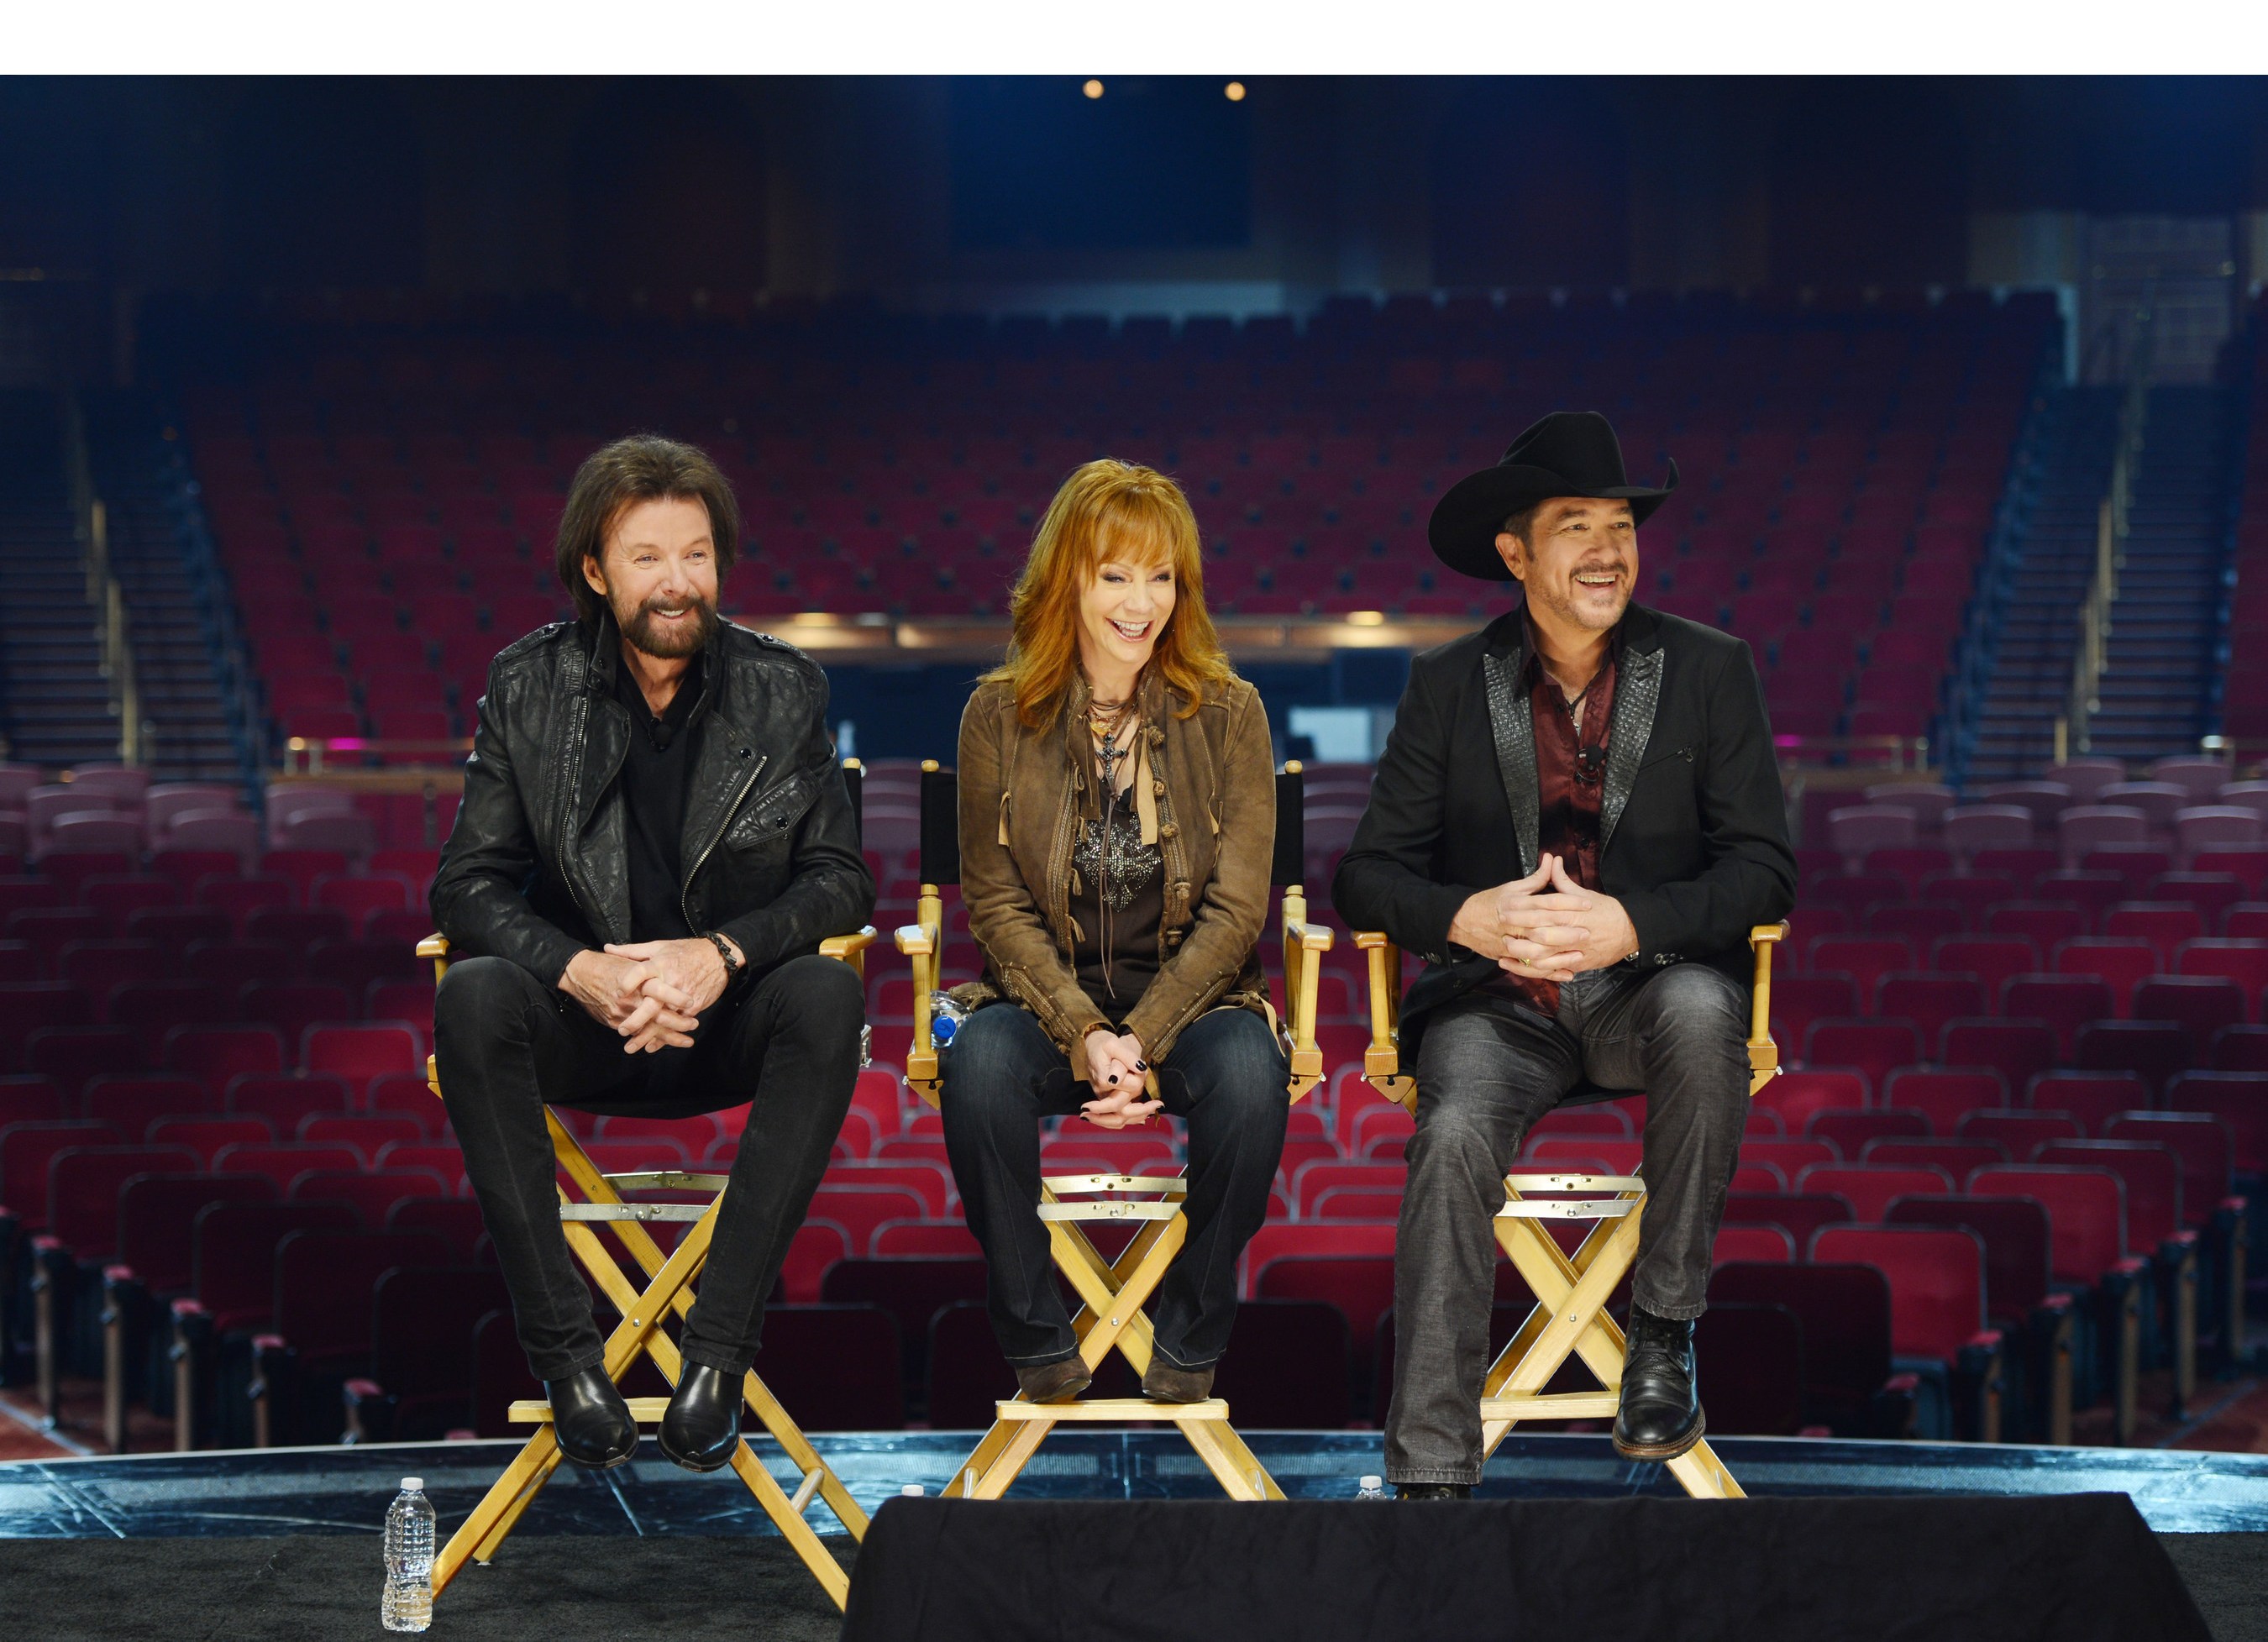 Reba, Brooks & Dunn ‘Together in Vegas’ for residency at Caesars Palace